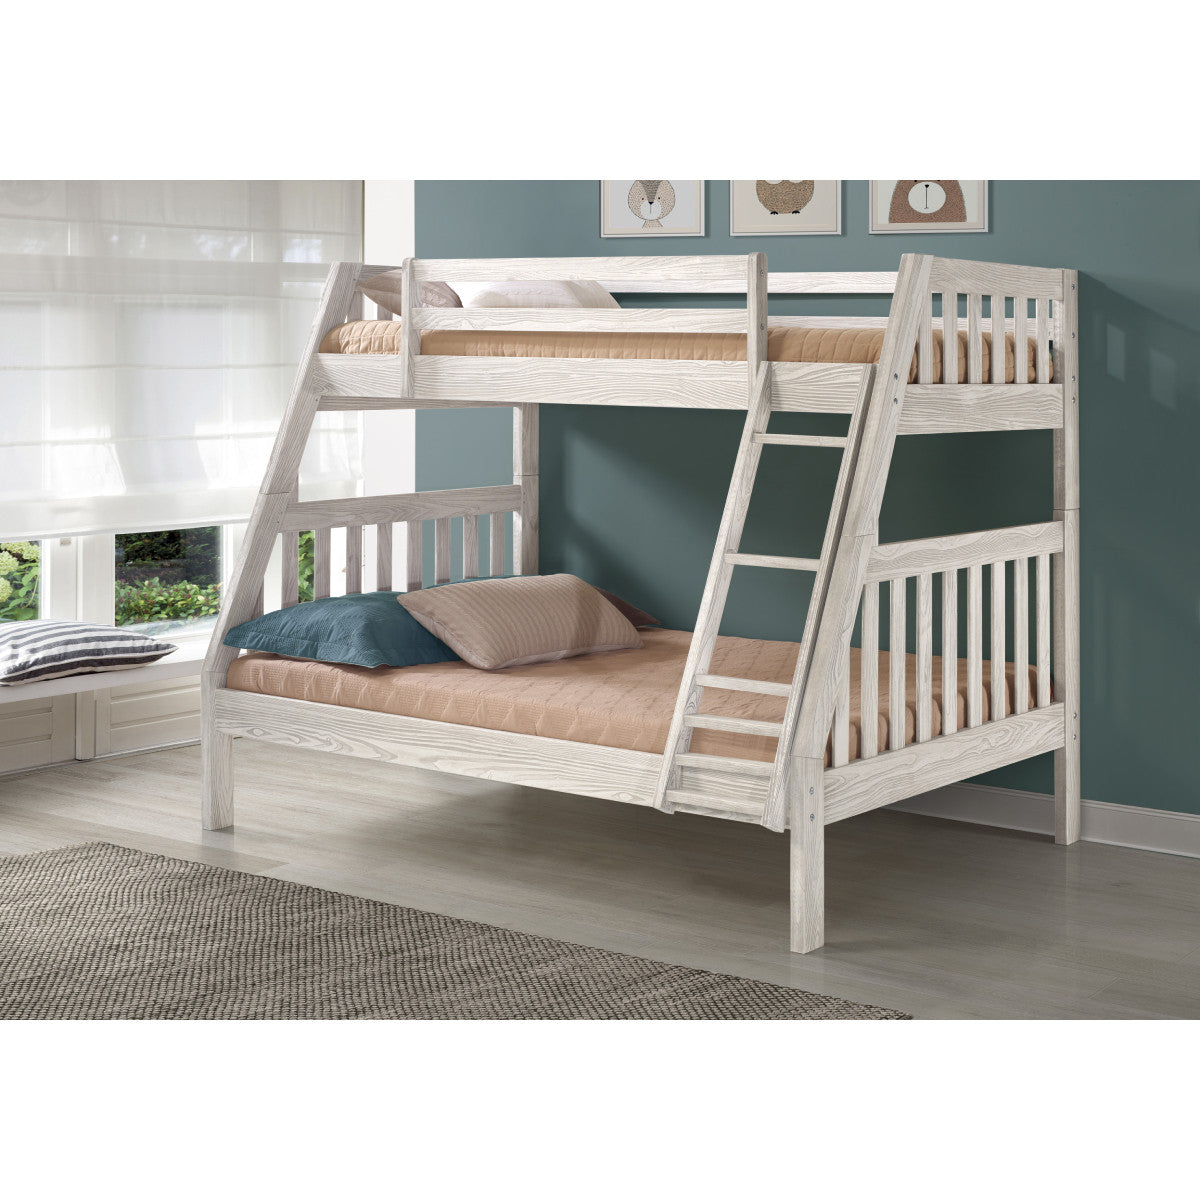 TWIN/FULL PRINCETON STAIRWAY BUNK BED WITH EXT KIT WITH DUAL UNDER BED DRAWERS SLATE GREY